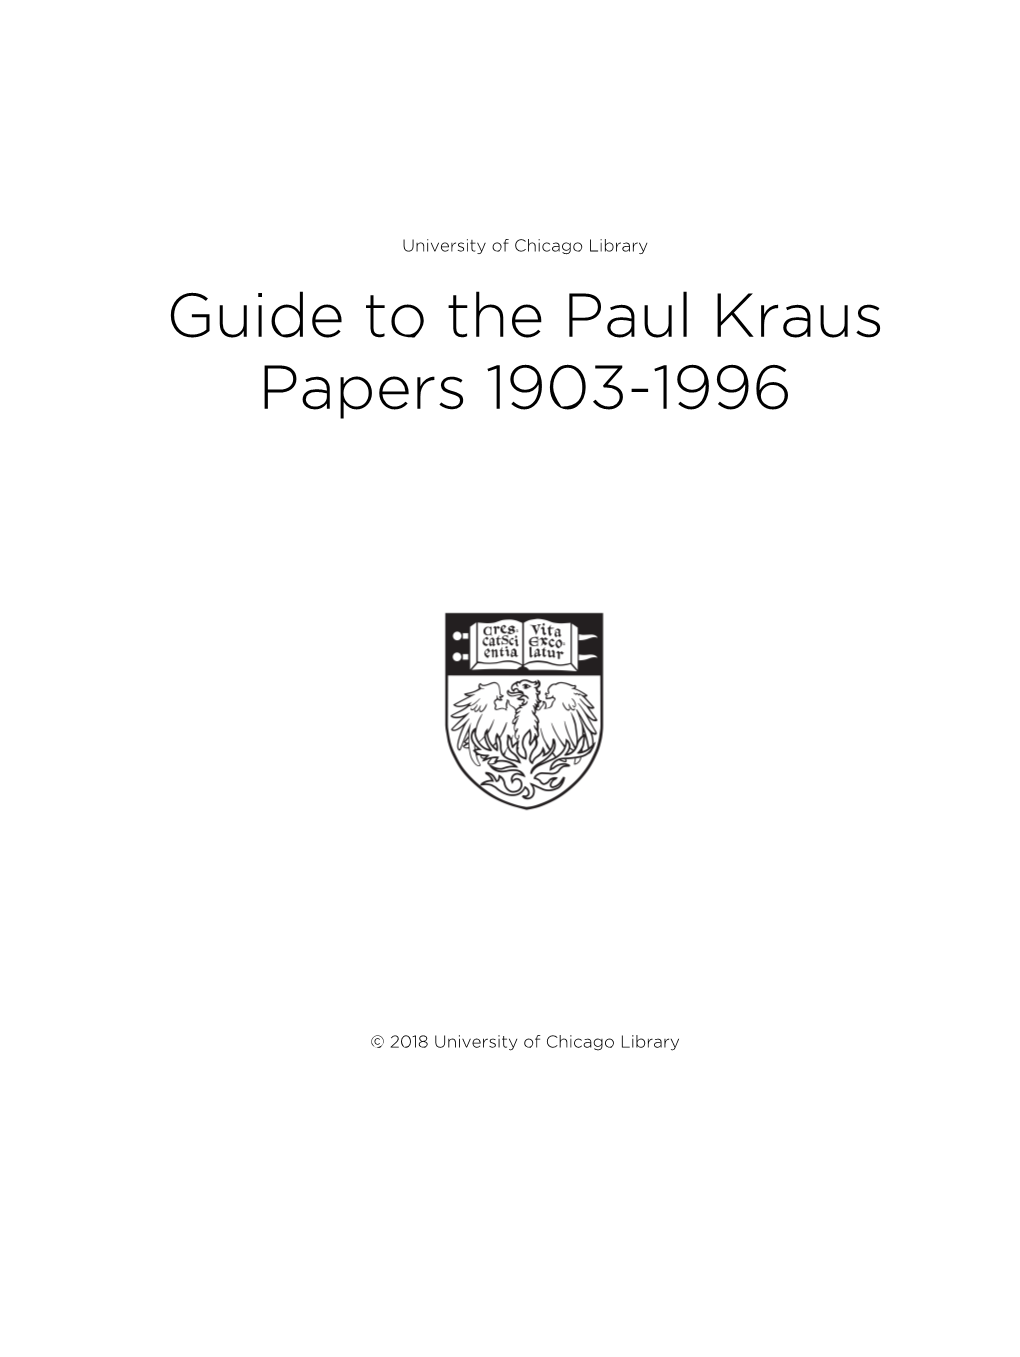 Guide to the Paul Kraus Papers 1903-1996